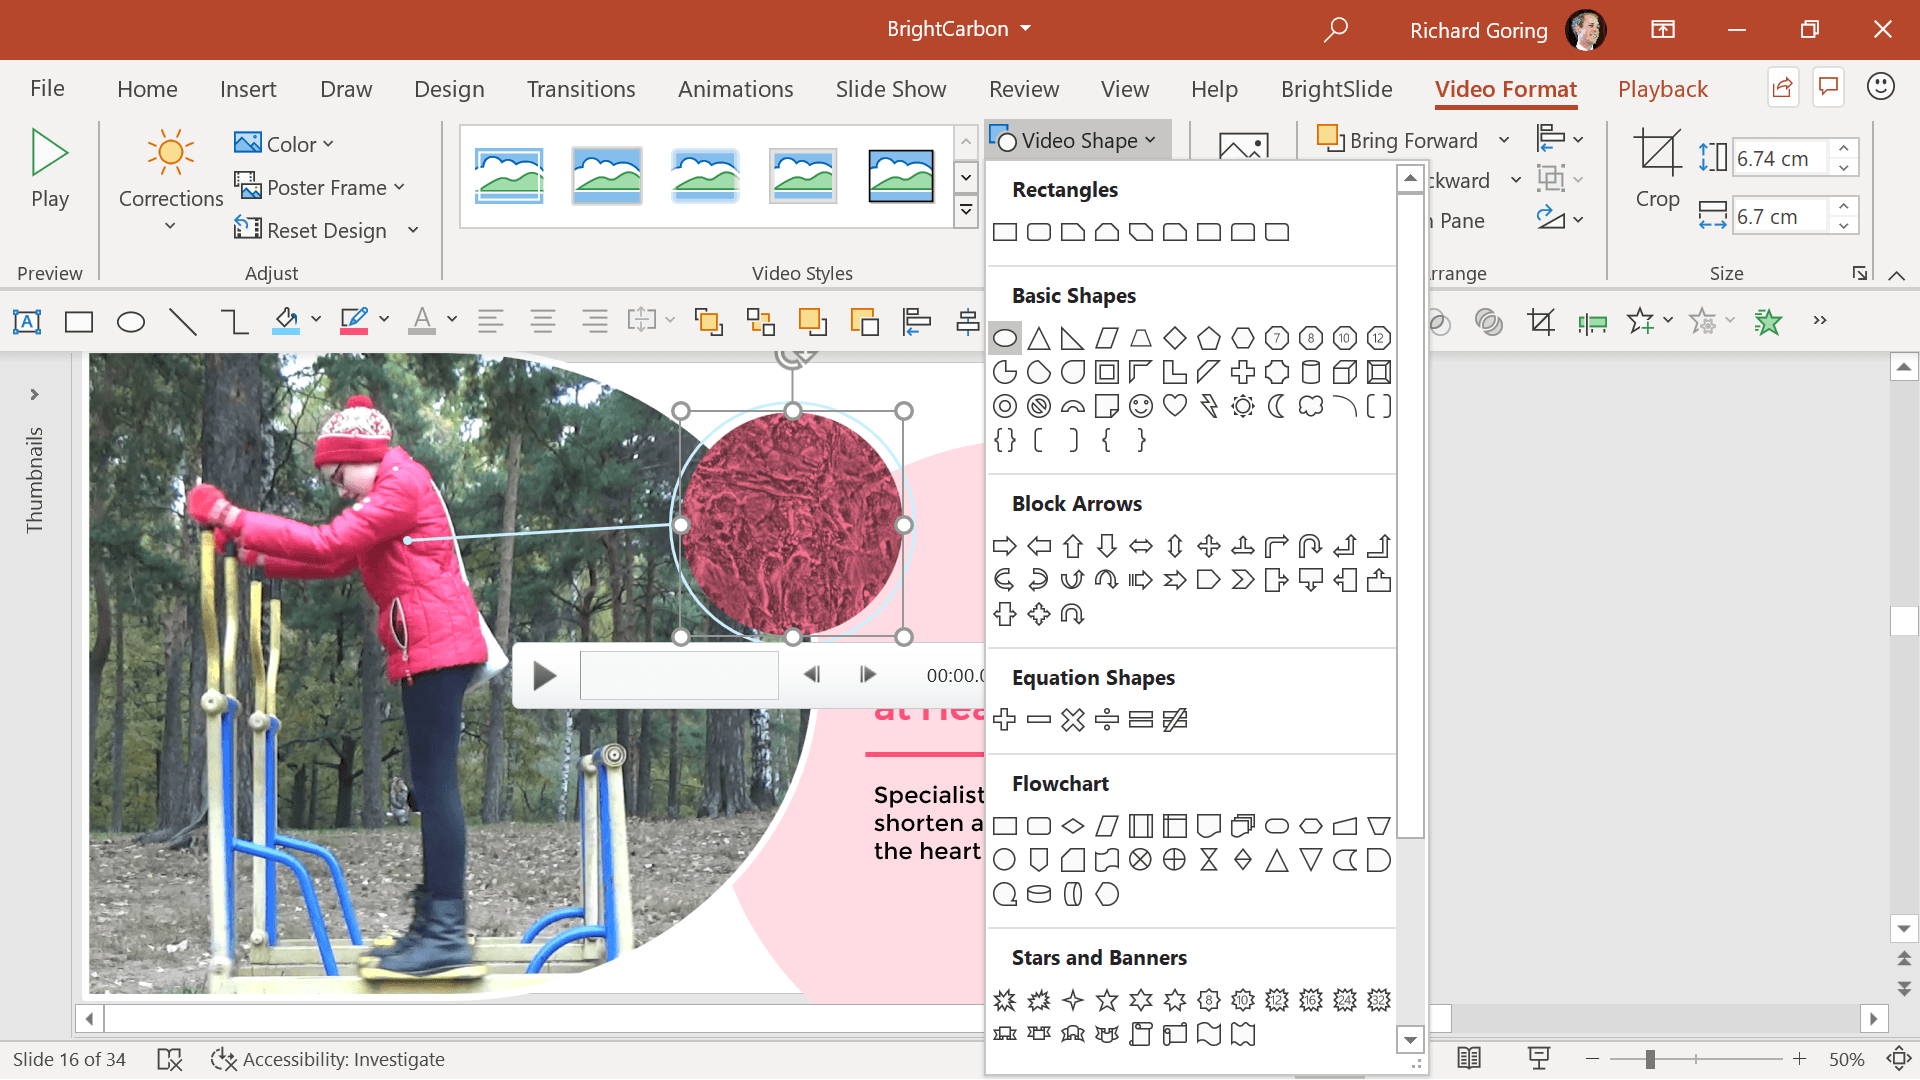 How to crop a video in PowerPoint. Go to Video Format and Video Shape to crop to shape.